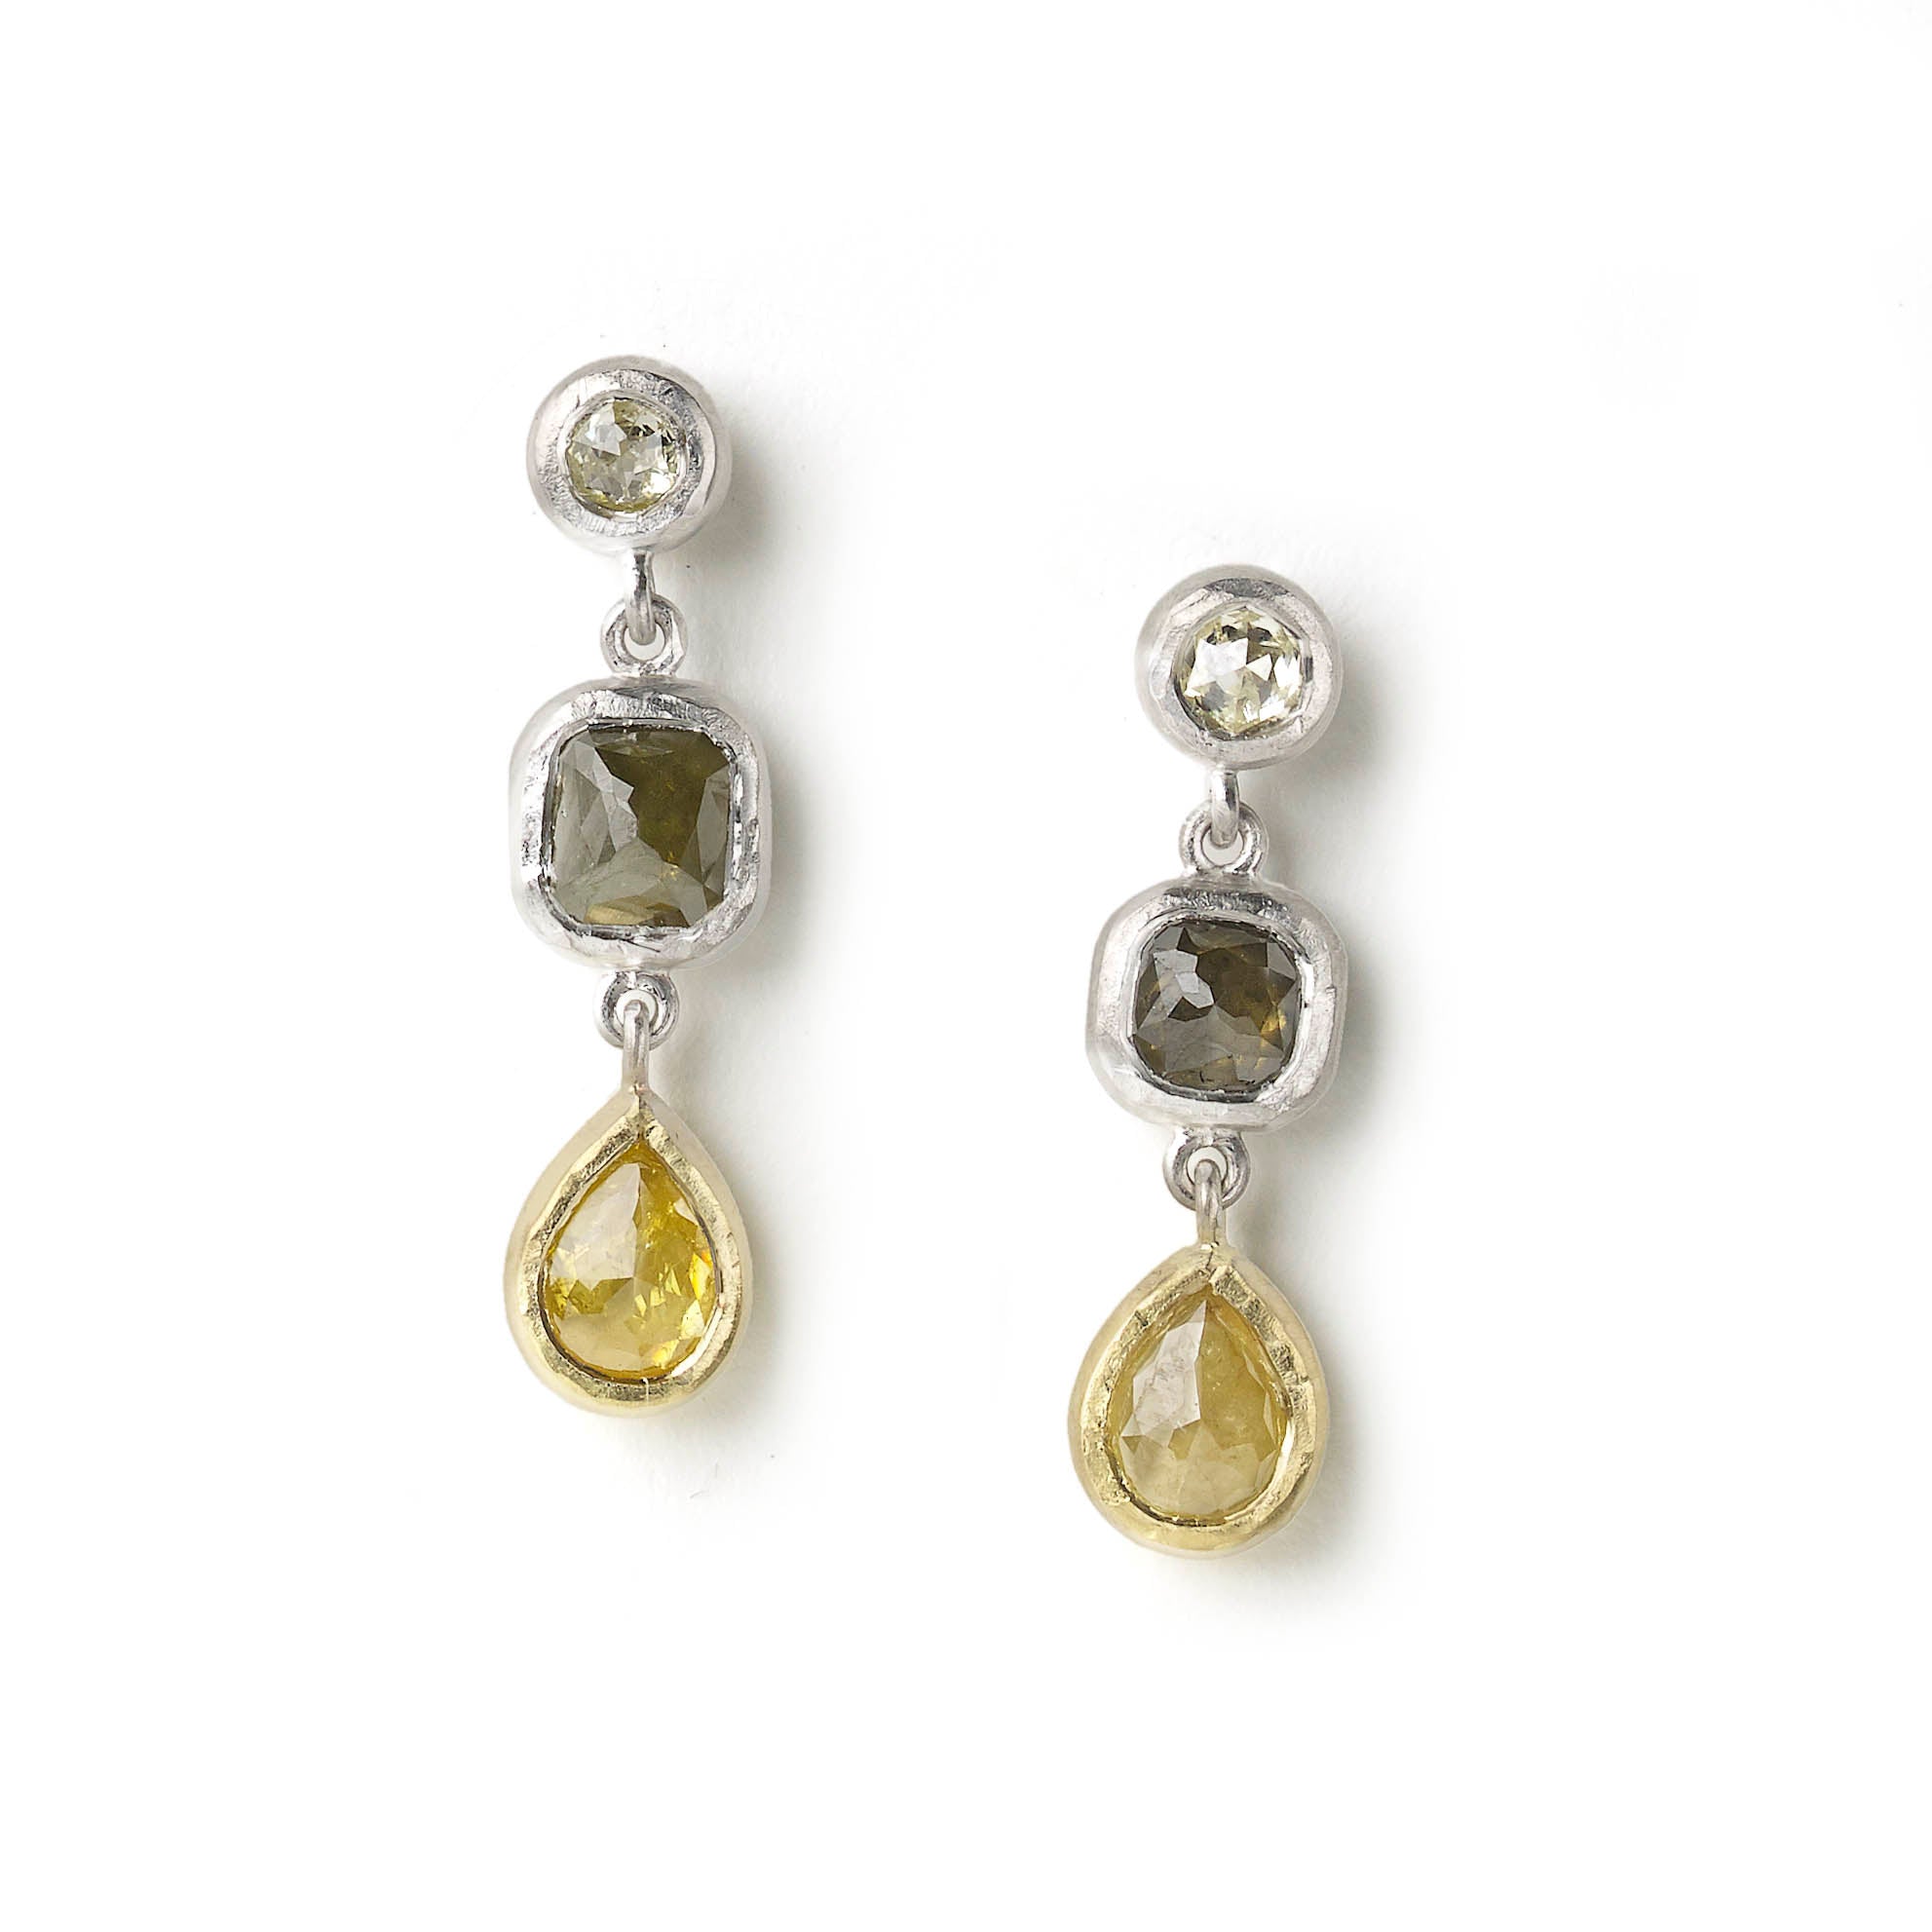 White gold drop earrings set with rose cut diamonds, yellow pear shaped rose cut diamonds set in yellow gold